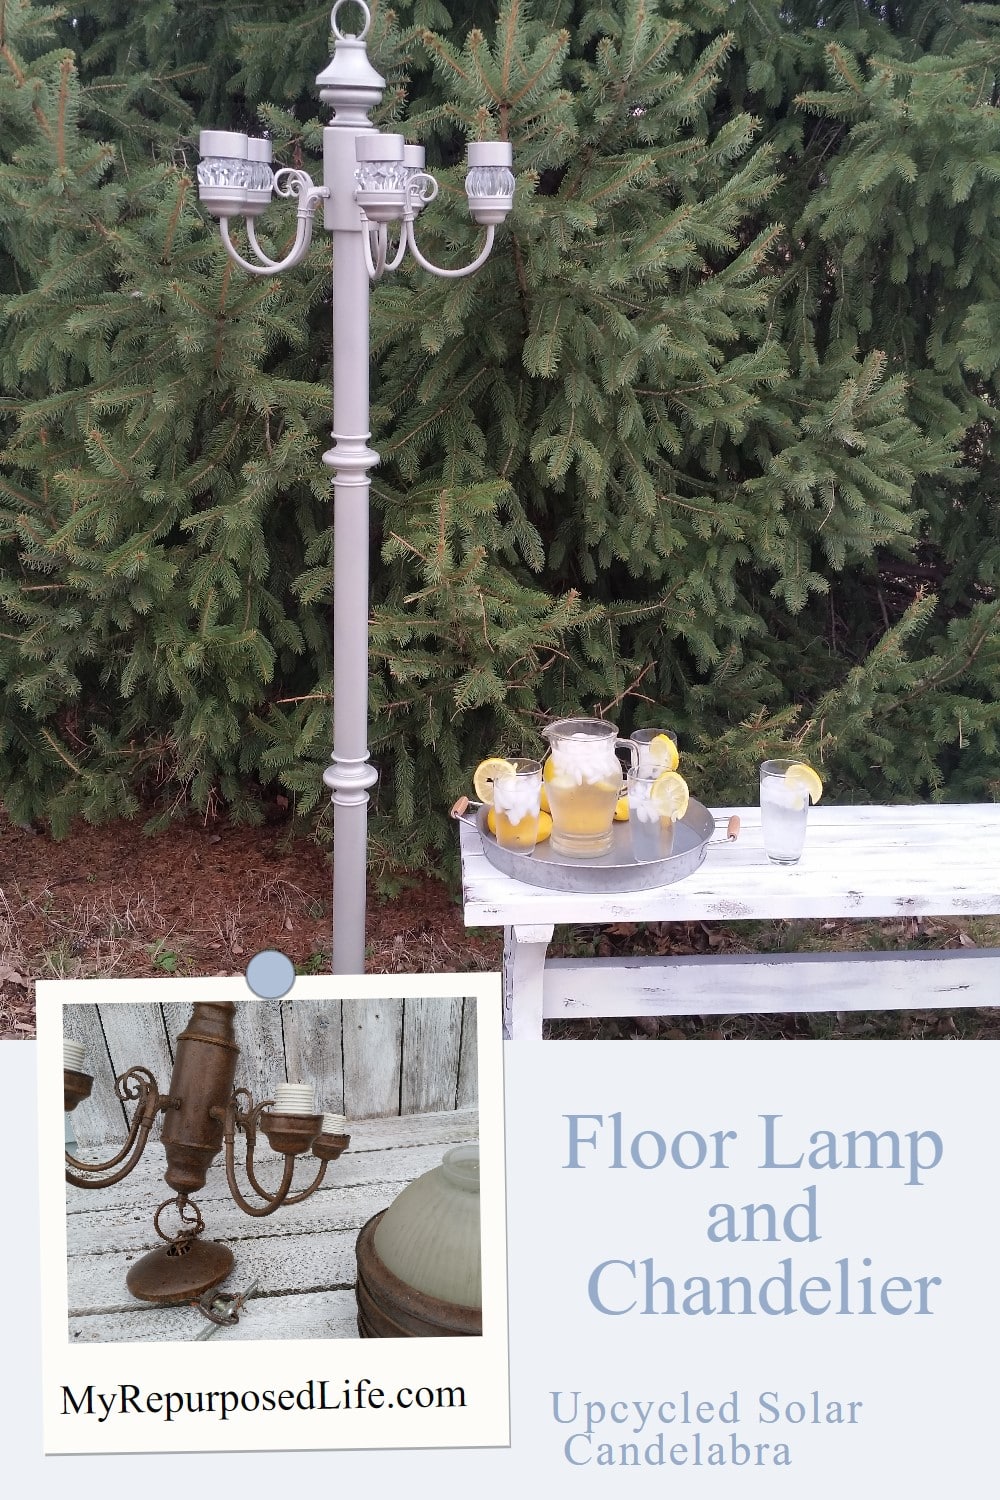 How to make a floor lamp solar chandelier using bits and pieces of an old lamp and chandelier. Great for the garden or patio. So many options. #MyRepurposedLife #repurposed #floorlamp #chandelier #solar #lightfeature via @repurposedlife